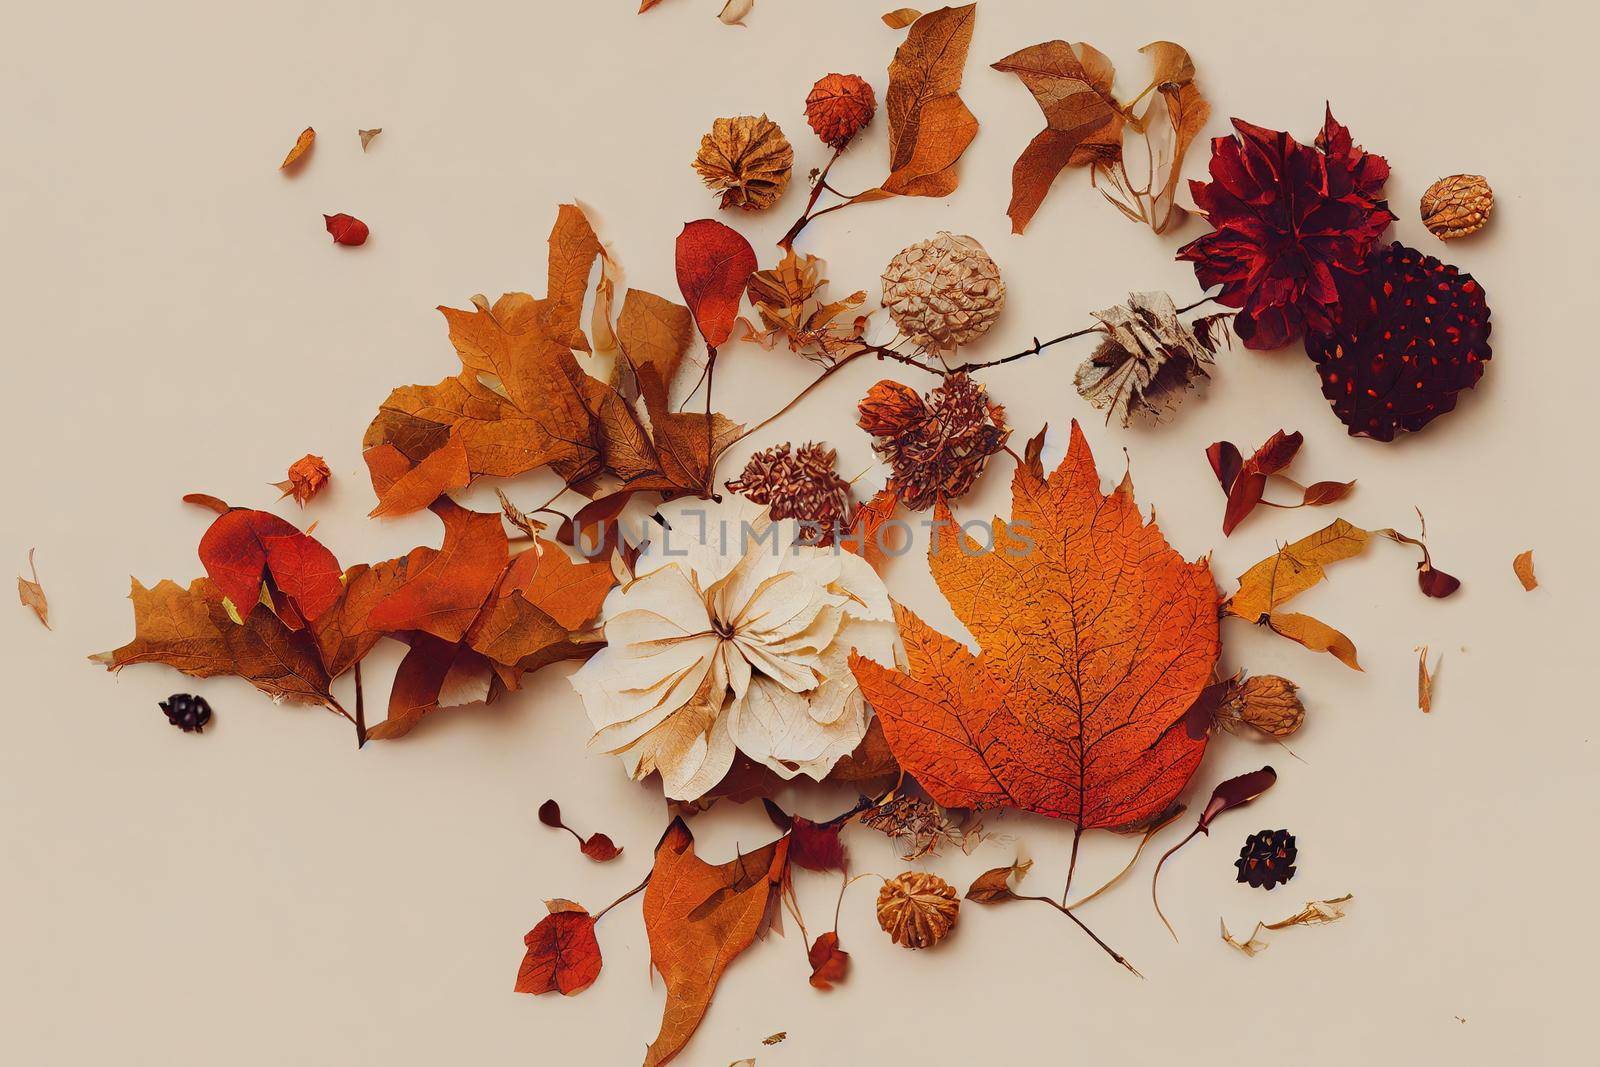 Autumn composition Pattern made of dried leaves, flowers, berries by 2ragon